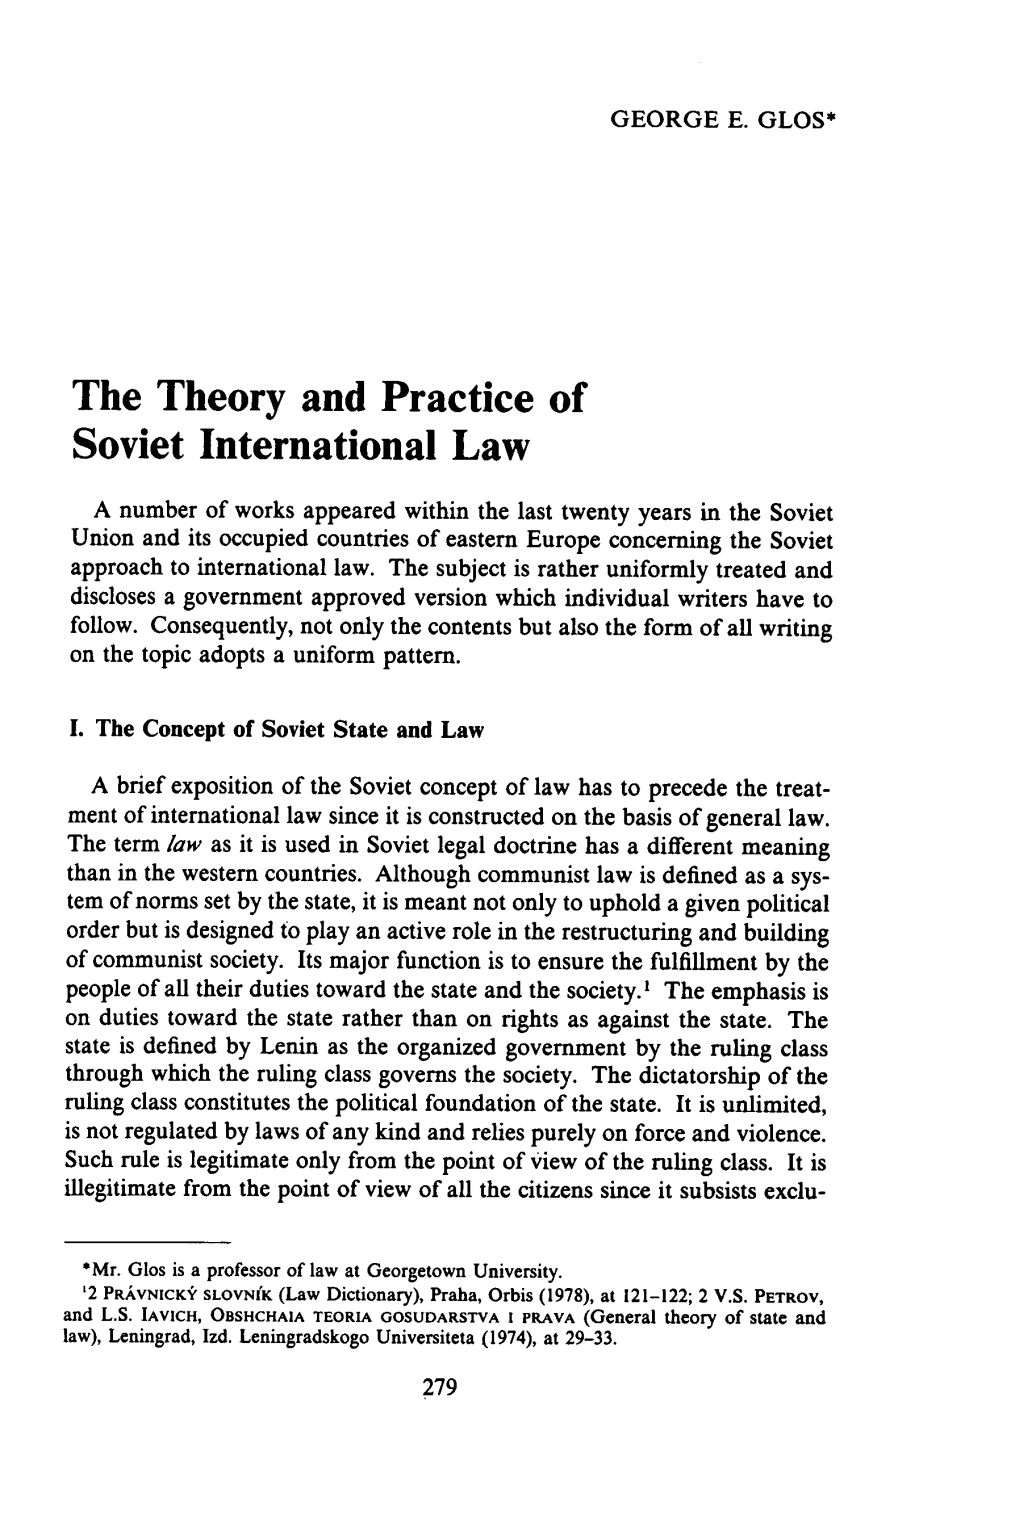 The Theory and Practice of Soviet International Law